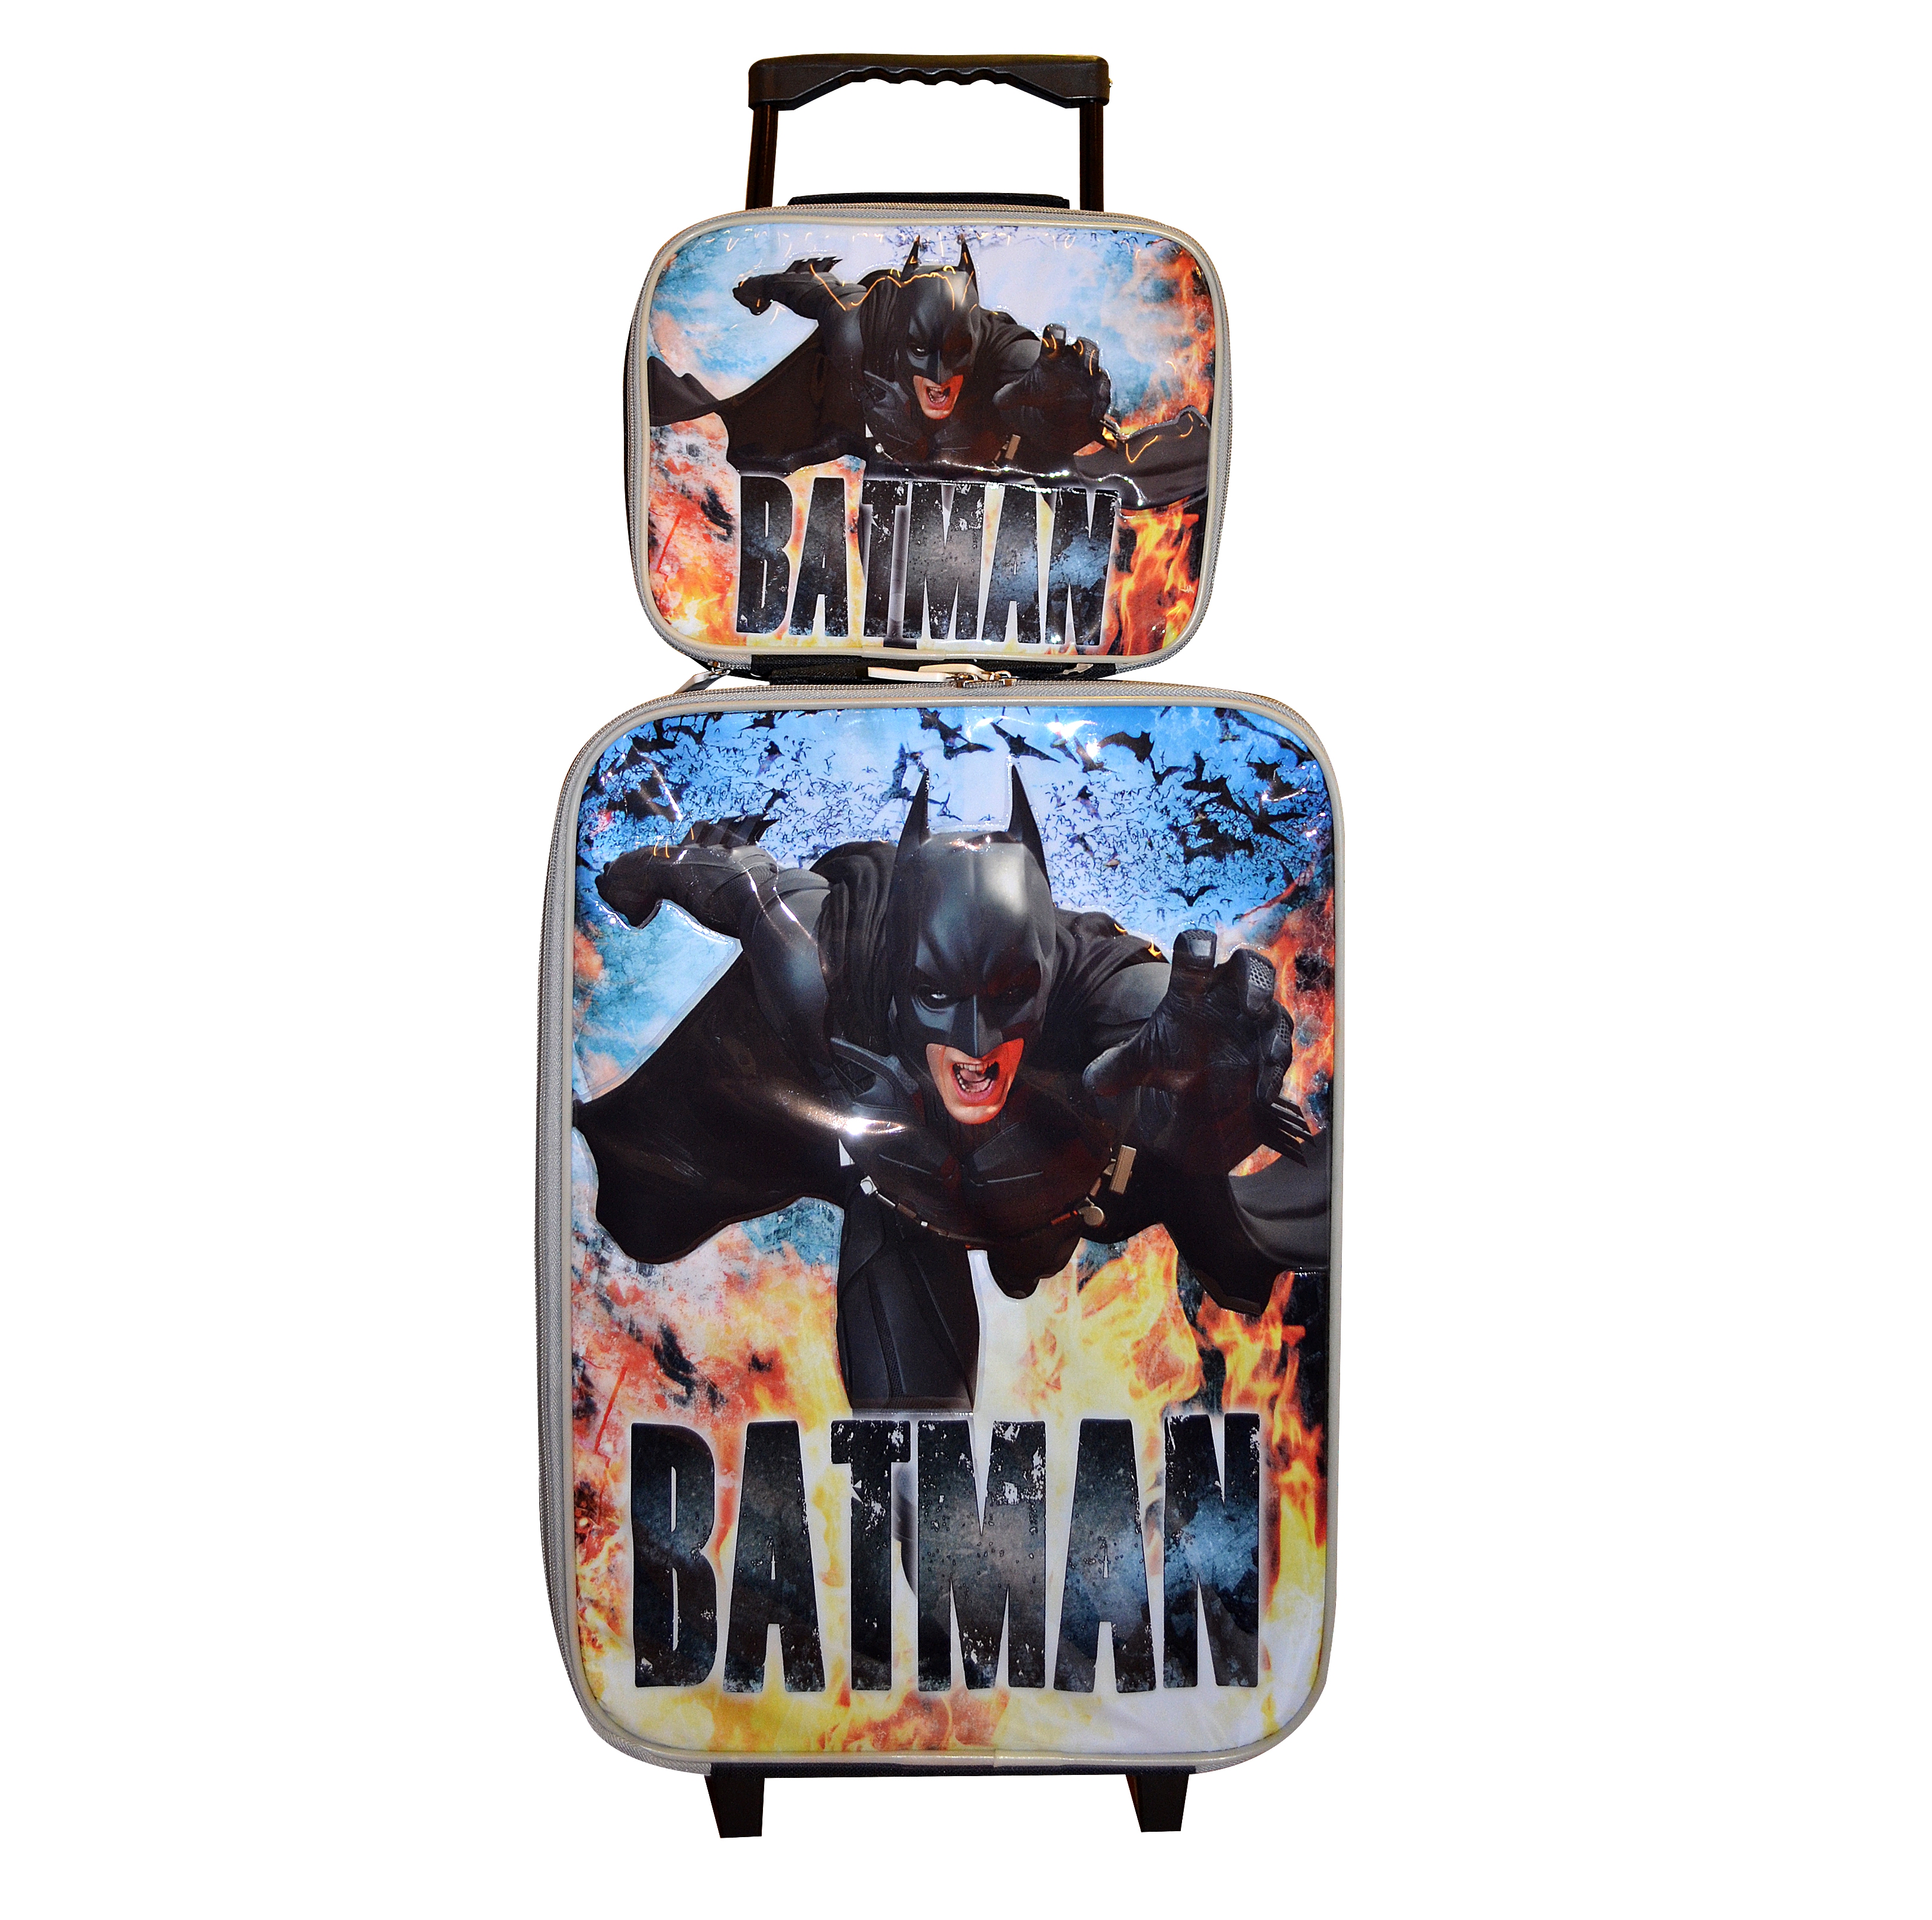 Batman 'The Dark Knight Rises' 2 Piece Suitcase with Lunch Bag Luggage Set